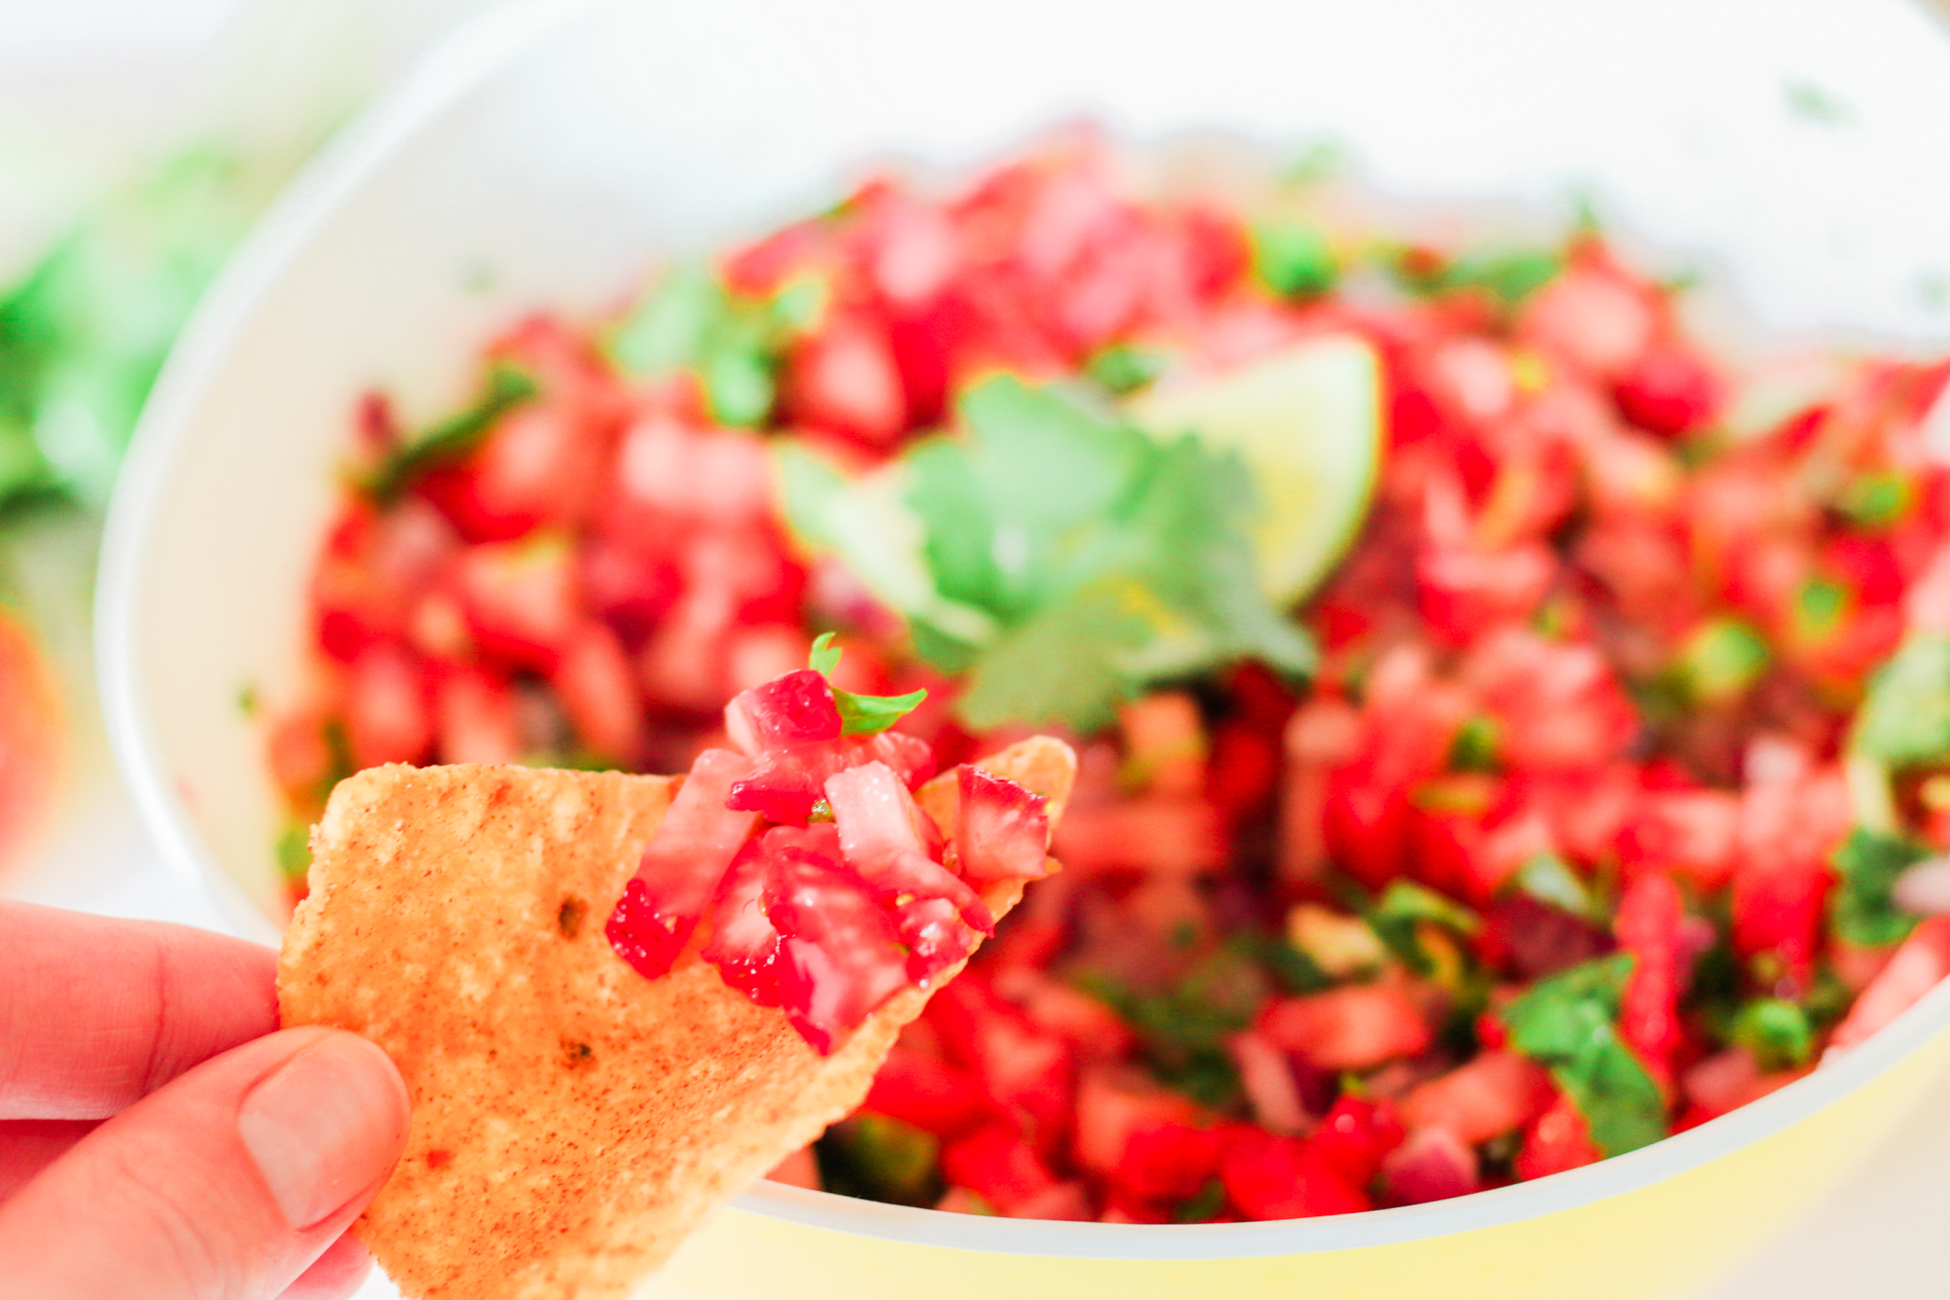 Two Quick Fresh Salsa Recipes for Your Cinco de Mayo Fiesta by southern lifestyle blogger Stephanie Ziajka from Diary of a Debutante, strawberry jalapeno salsa recipe, strawberry and jalapeno salsa recipe, homemade salsa recipe, easy Cinco de Mayo salsa recipe